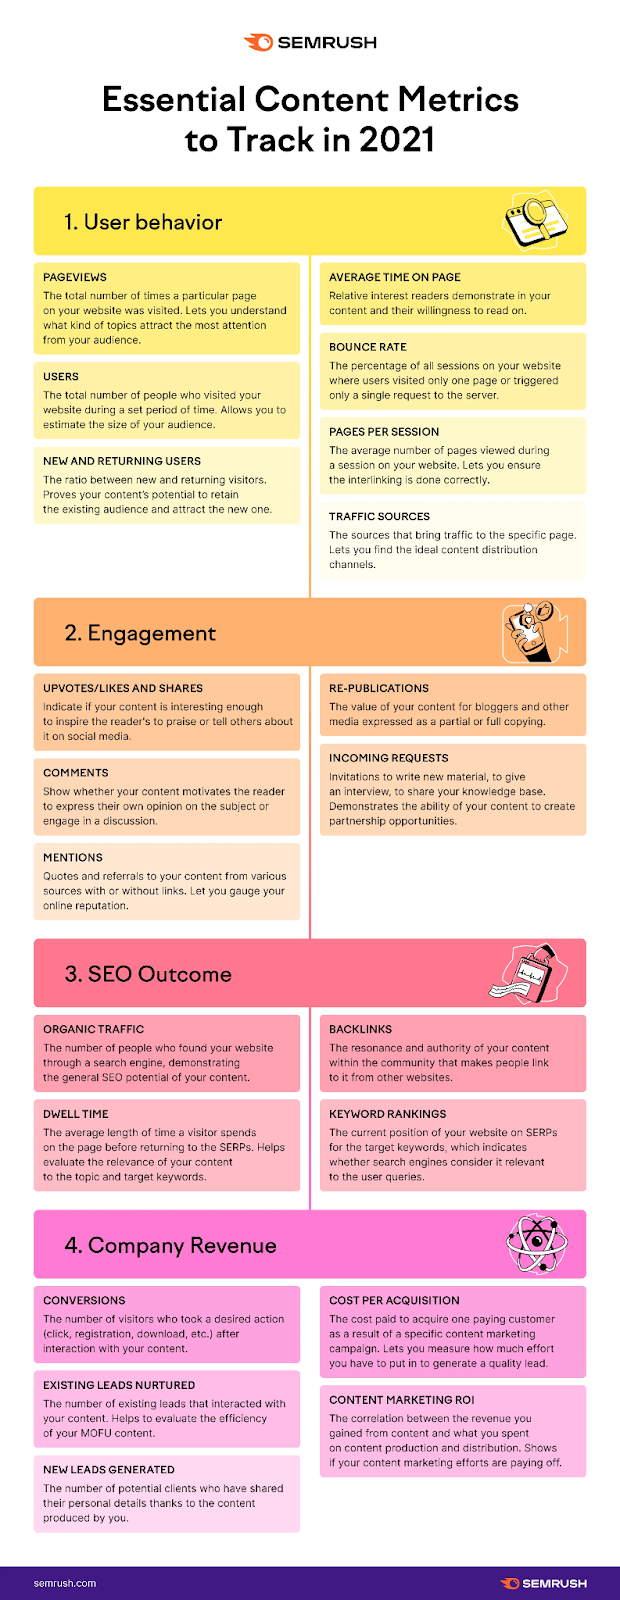 an infographic by Semrush with tips on essential content metrics to track